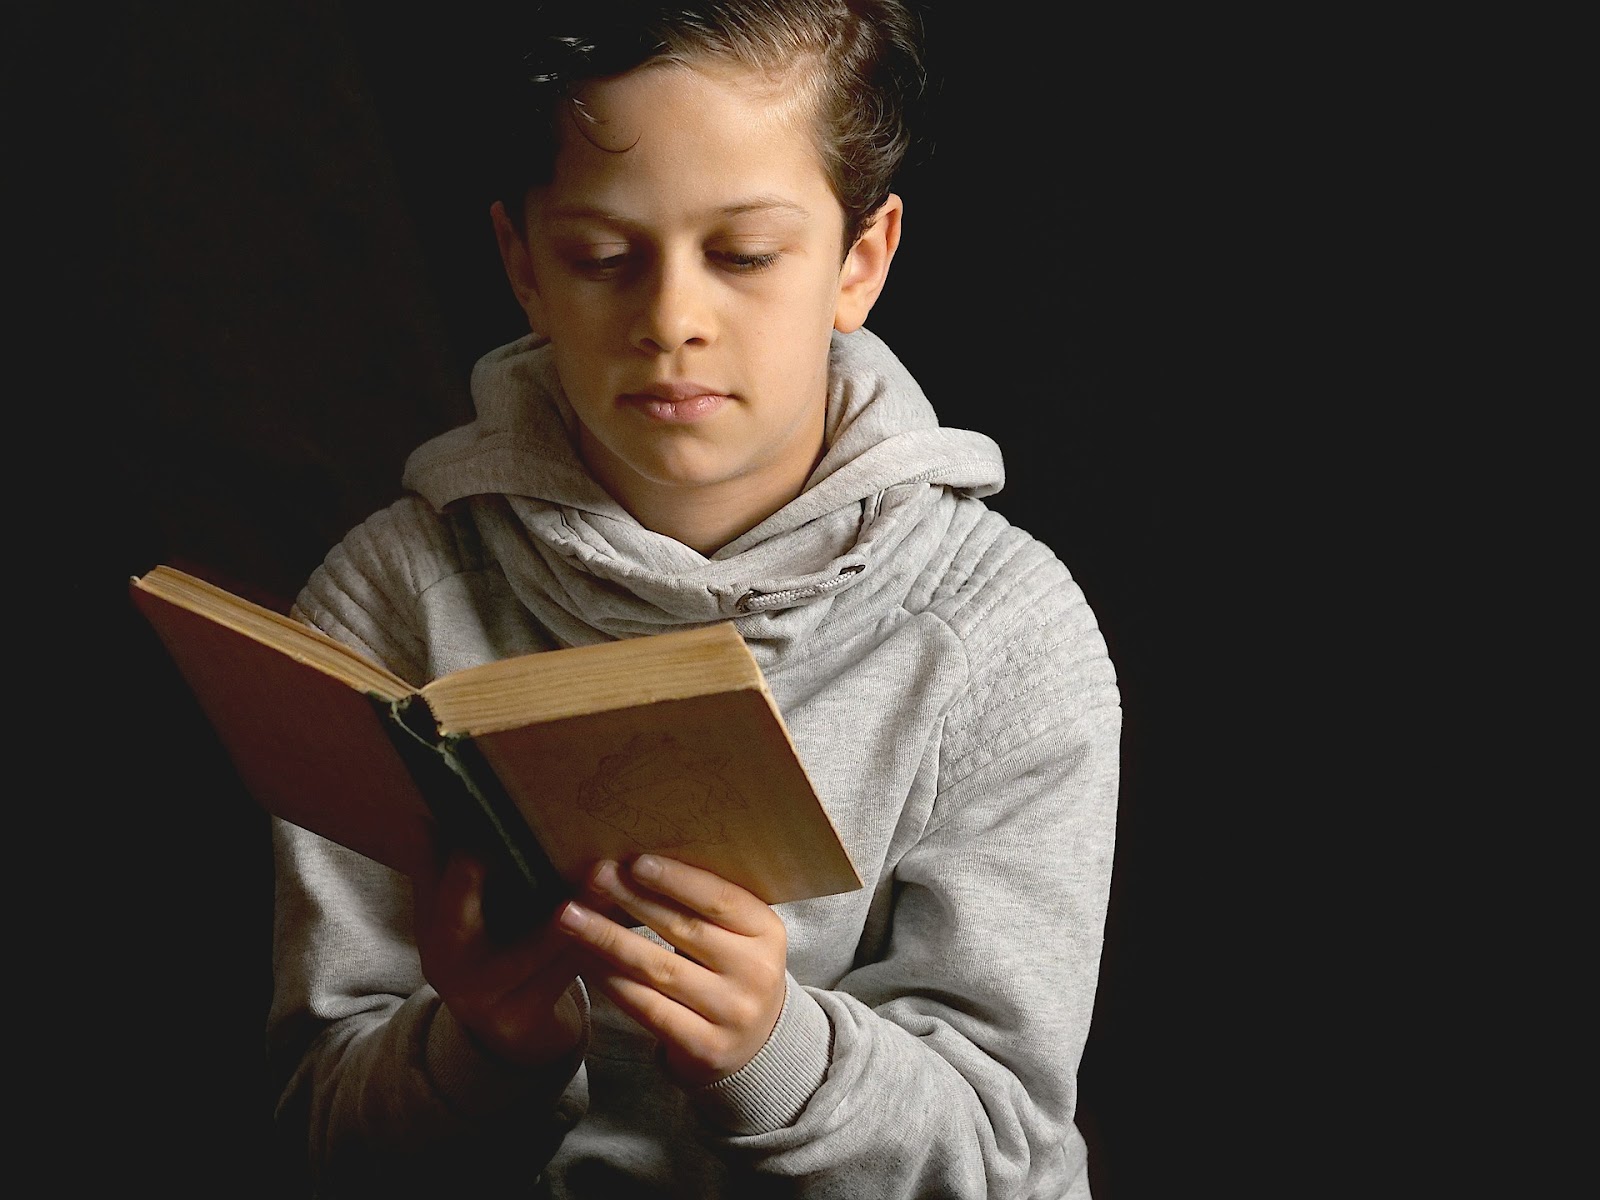 How to Help a Child with Dyslexia Read